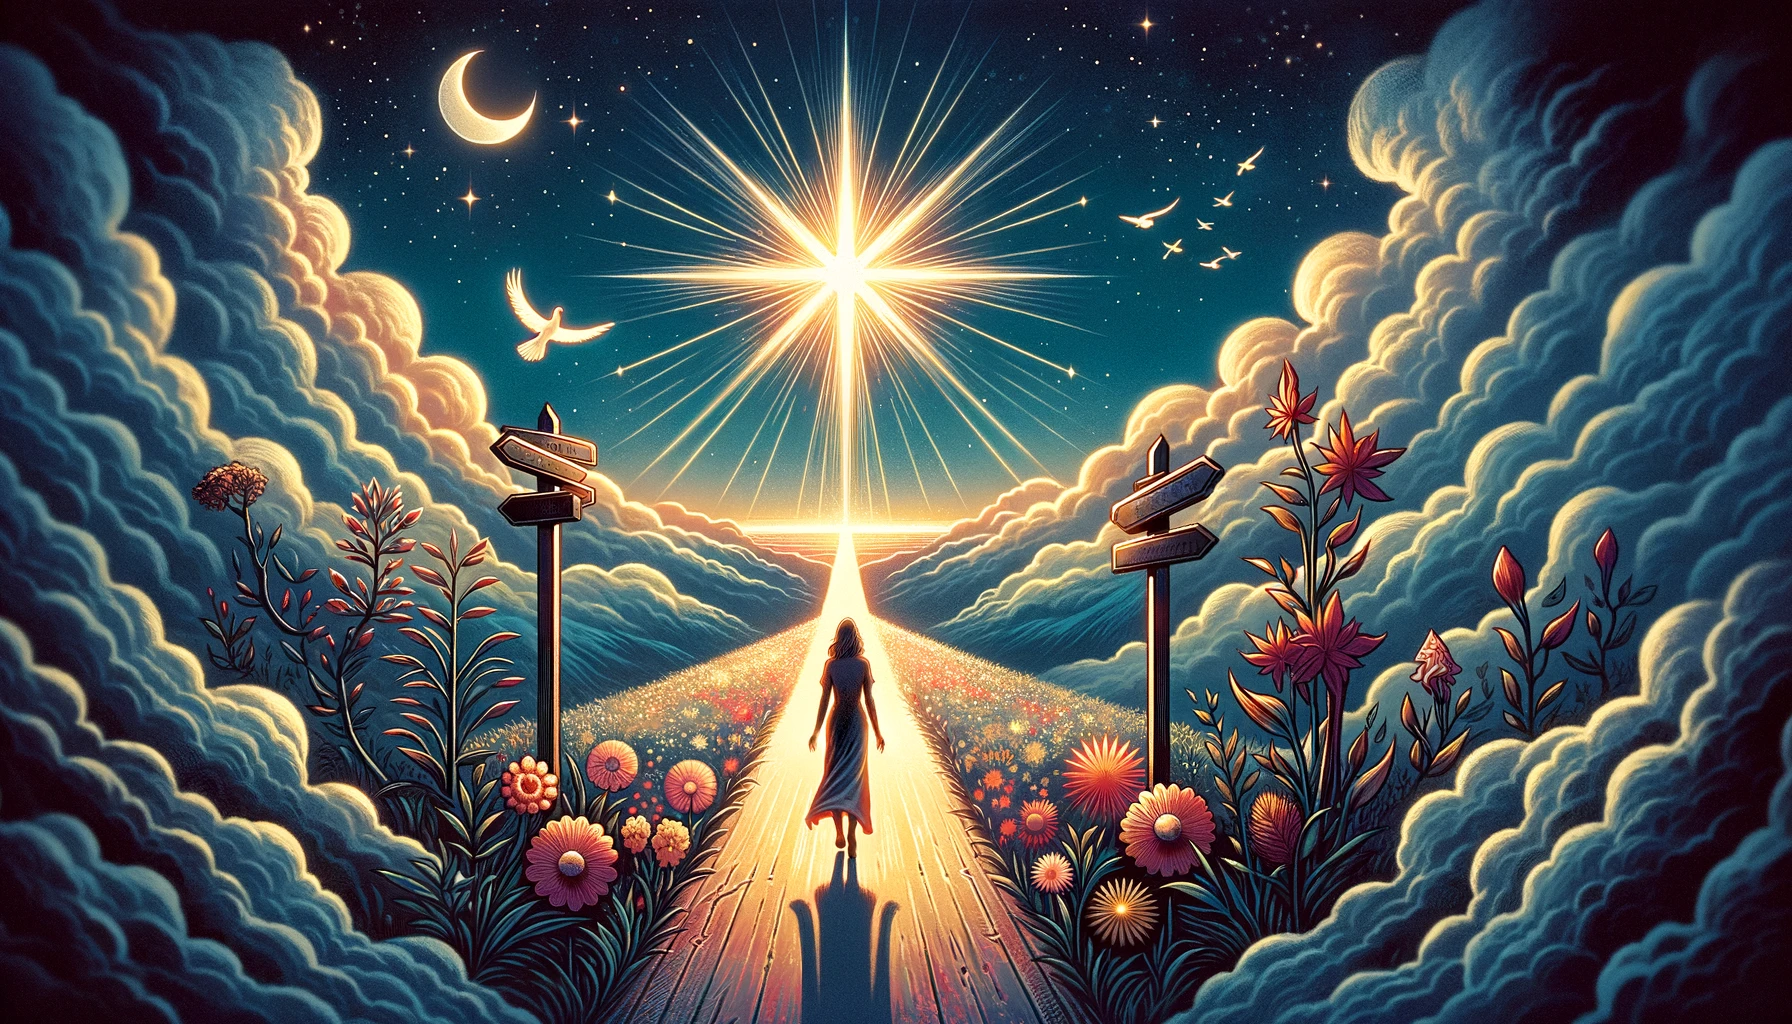 "An evocative visualization portraying a figure at a crossroads, gazing up to a radiant figure in the sky symbolizing the moment of decision and the call to embrace one's true potential. Surrounding elements signify renewal, awakening, and the promise of a new beginning. The hopeful and determined atmosphere is intensified by a color palette blending the tranquil hues of dawn with vibrant sunrise colors, reflecting the profound impact of answering the call to action. Through its imagery, viewers are invited to contemplate the transformative power of decisive choices and the journey towards self-realization and growth."